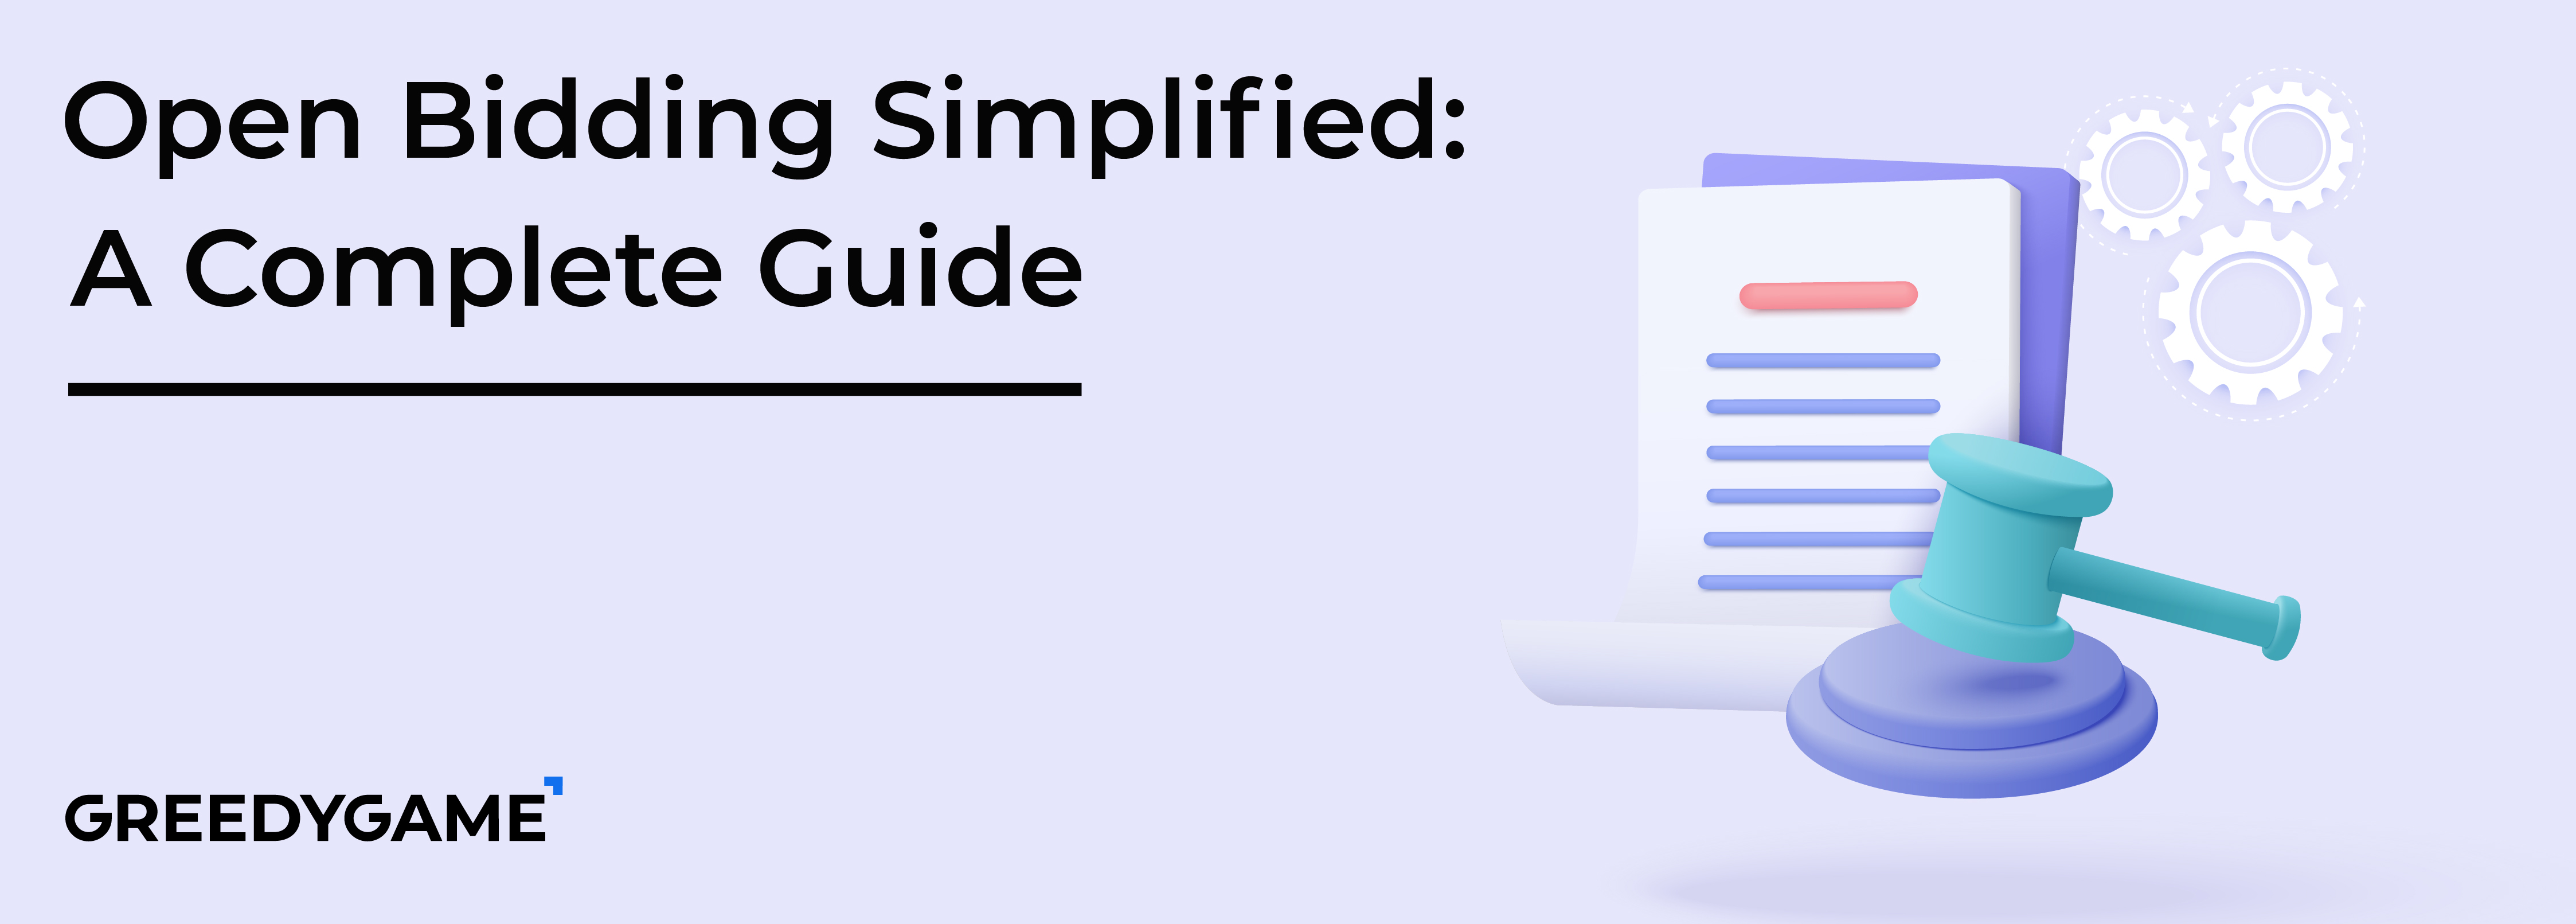 Open Bidding Simplified: A Complete Guide